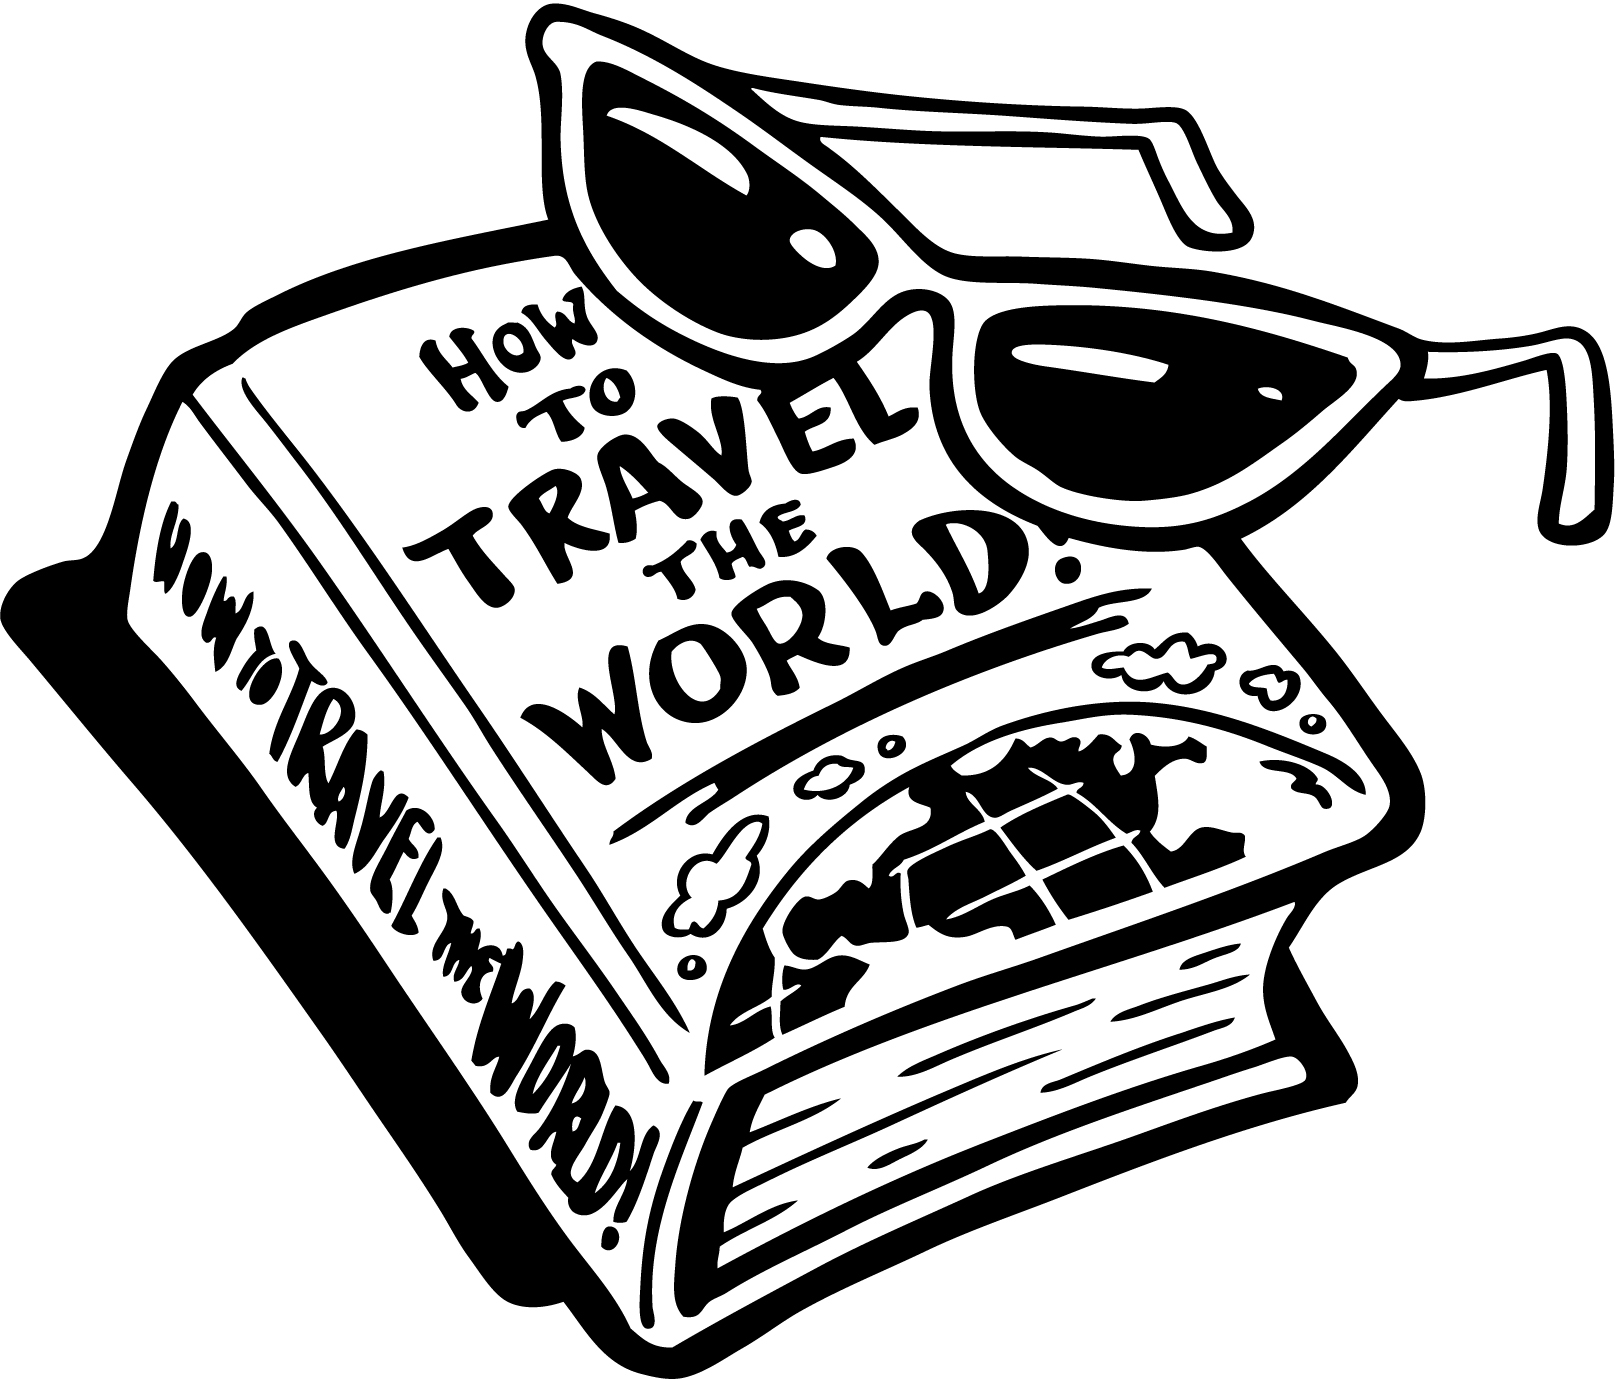 Travel guide clipart